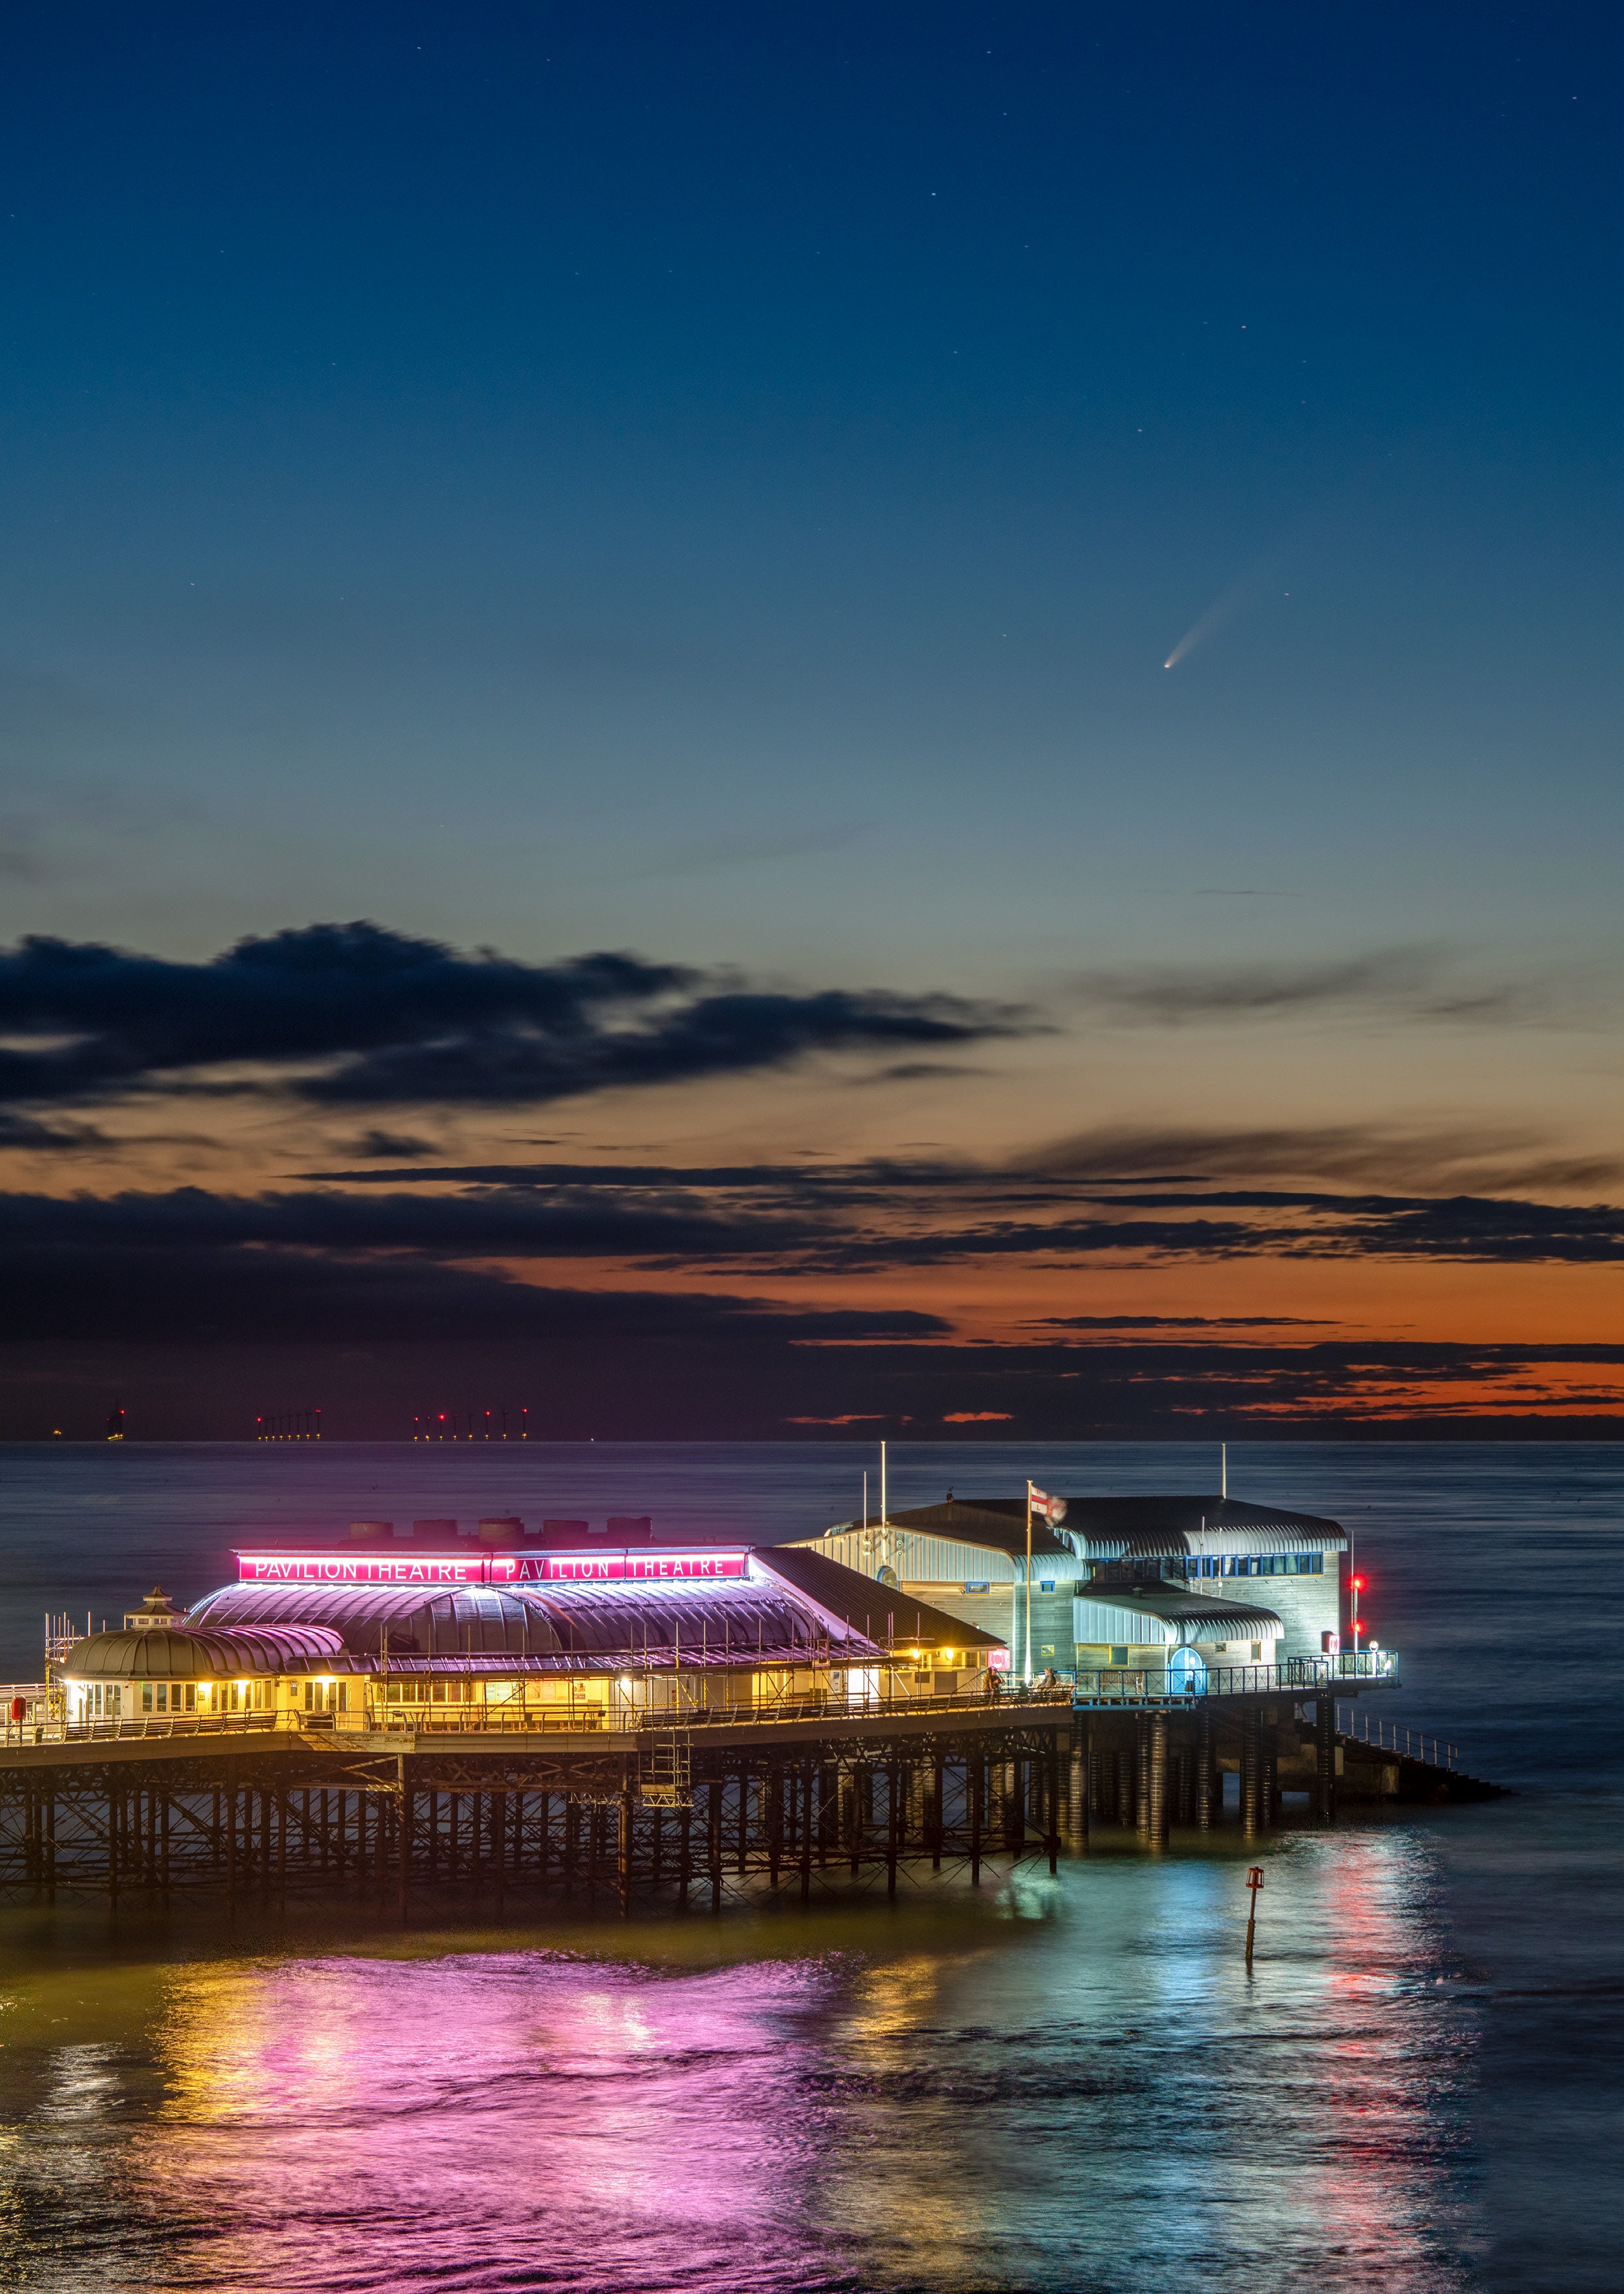 Image of Neowise comet over the Atlantic ocean as seen from Norfolk, UK at dusk with a light up pier in the foreground.